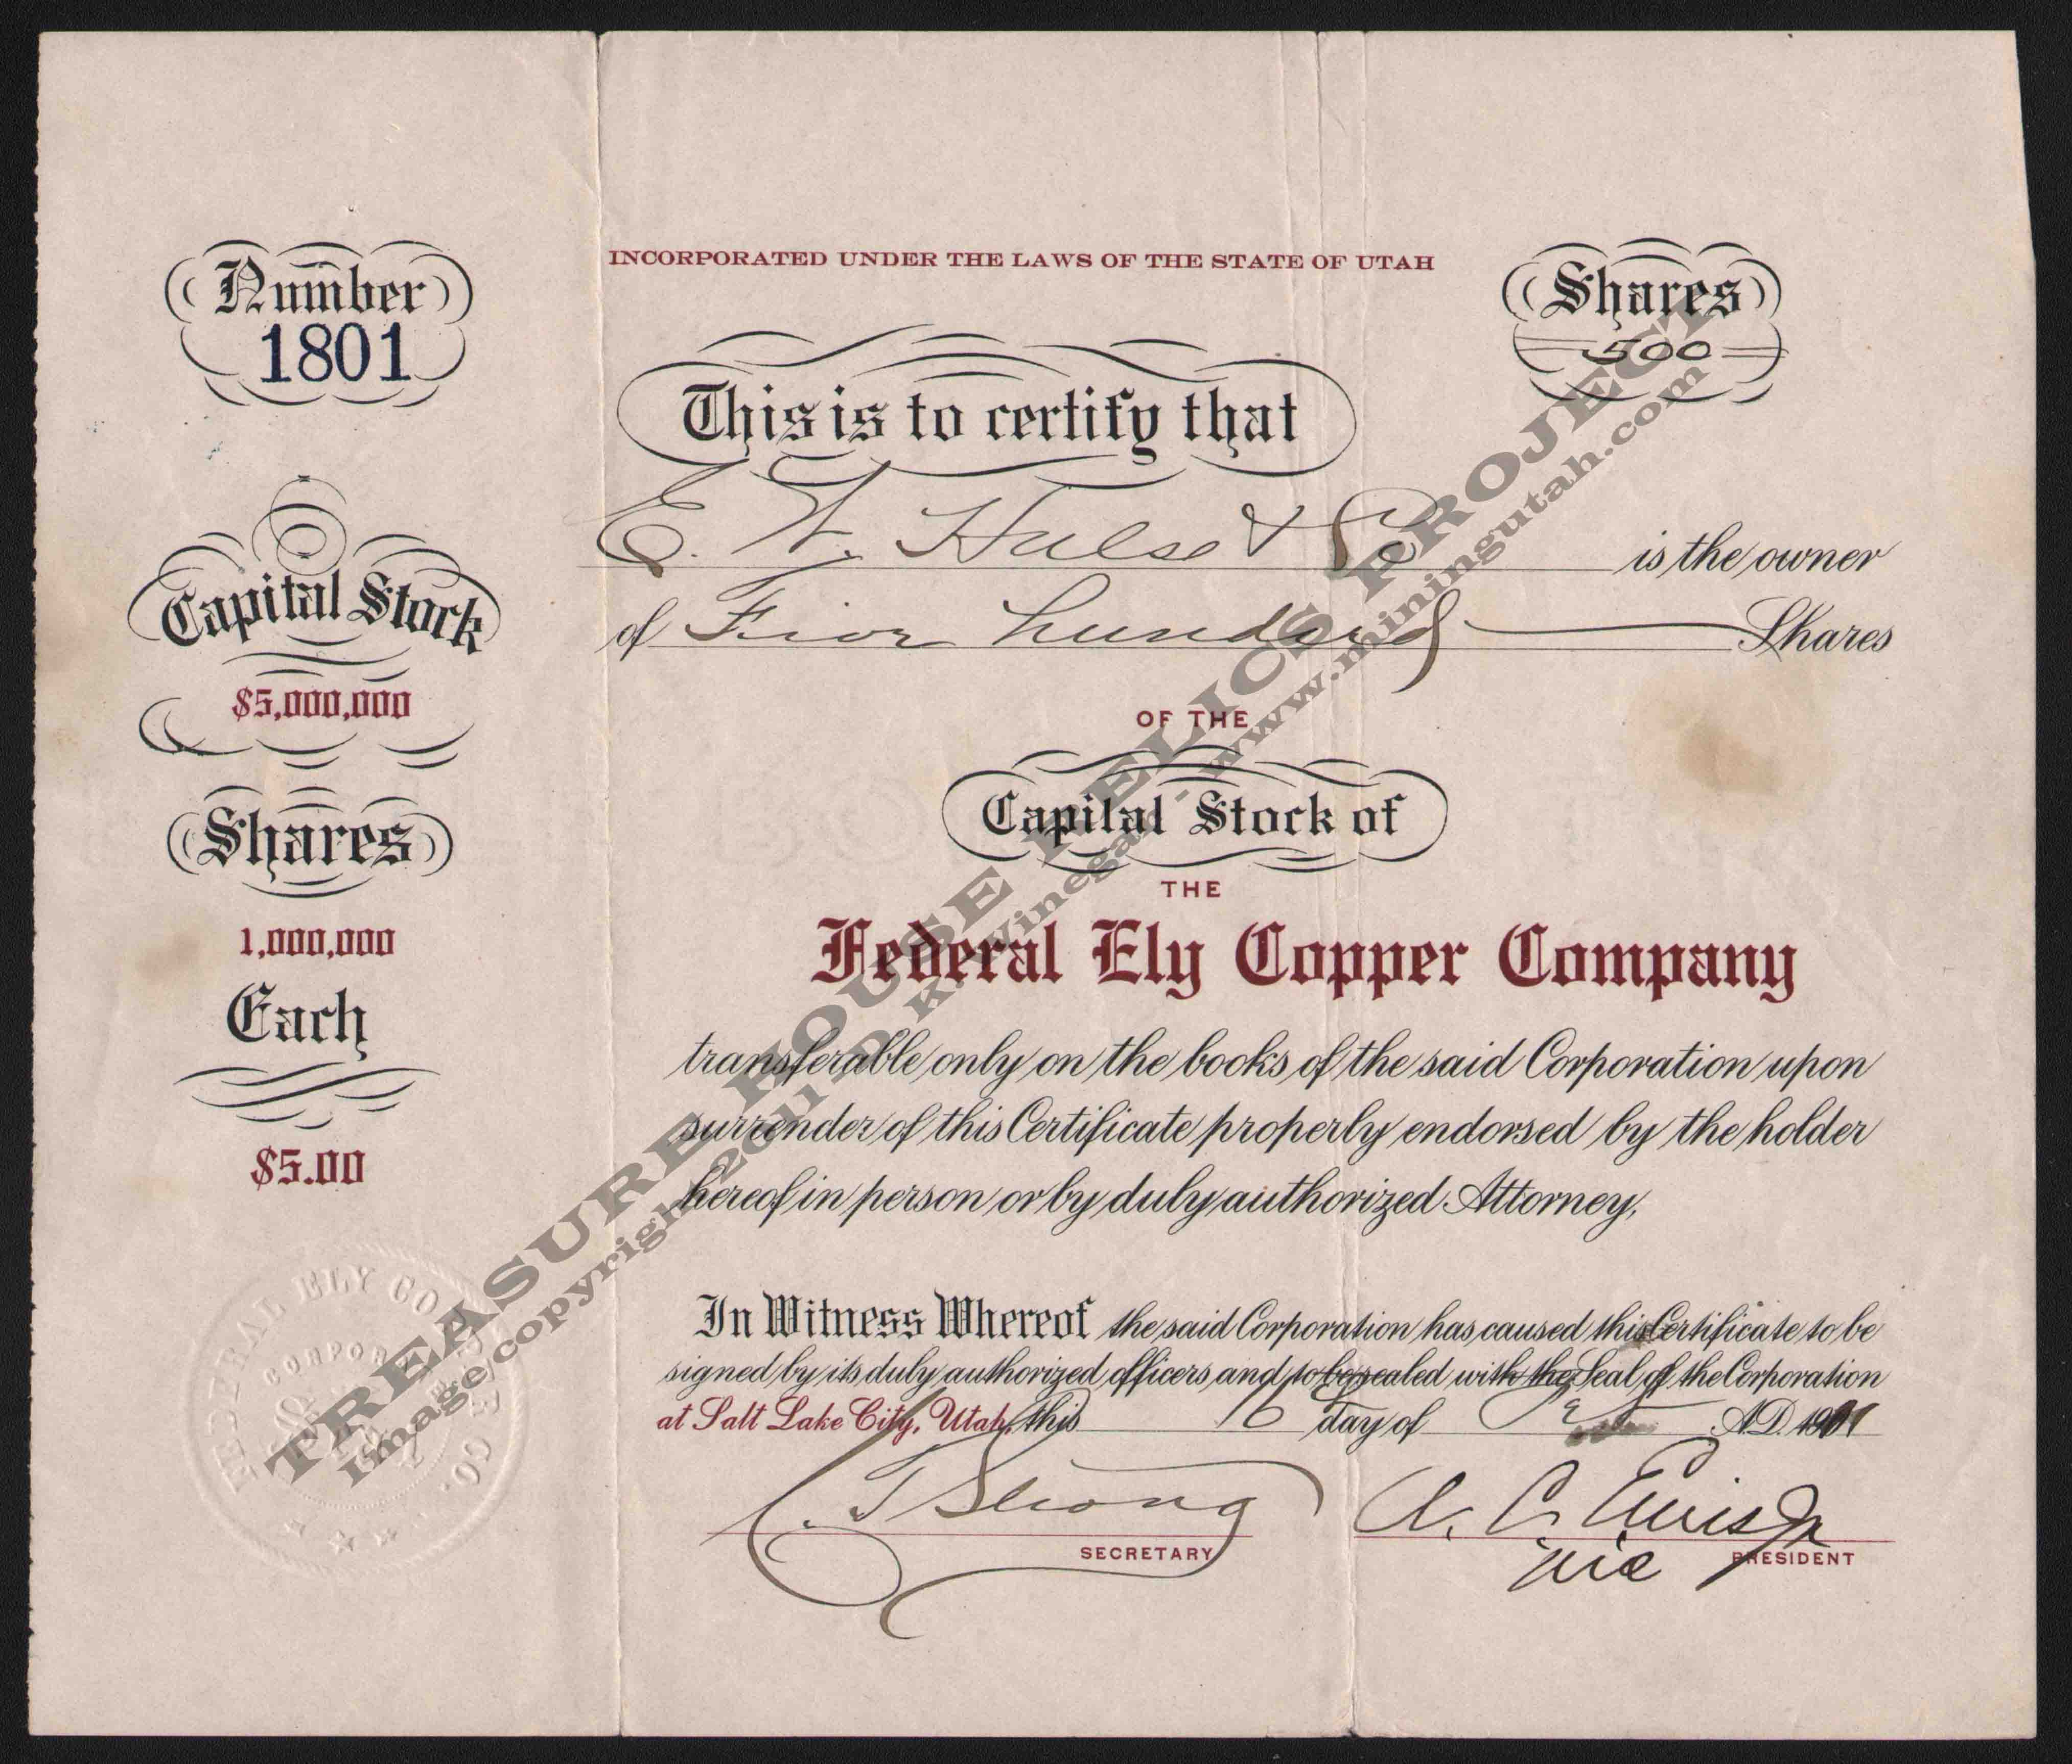 FEDERAL_ELY_COPPER_COMPANY_1801_400_emboss.jpg